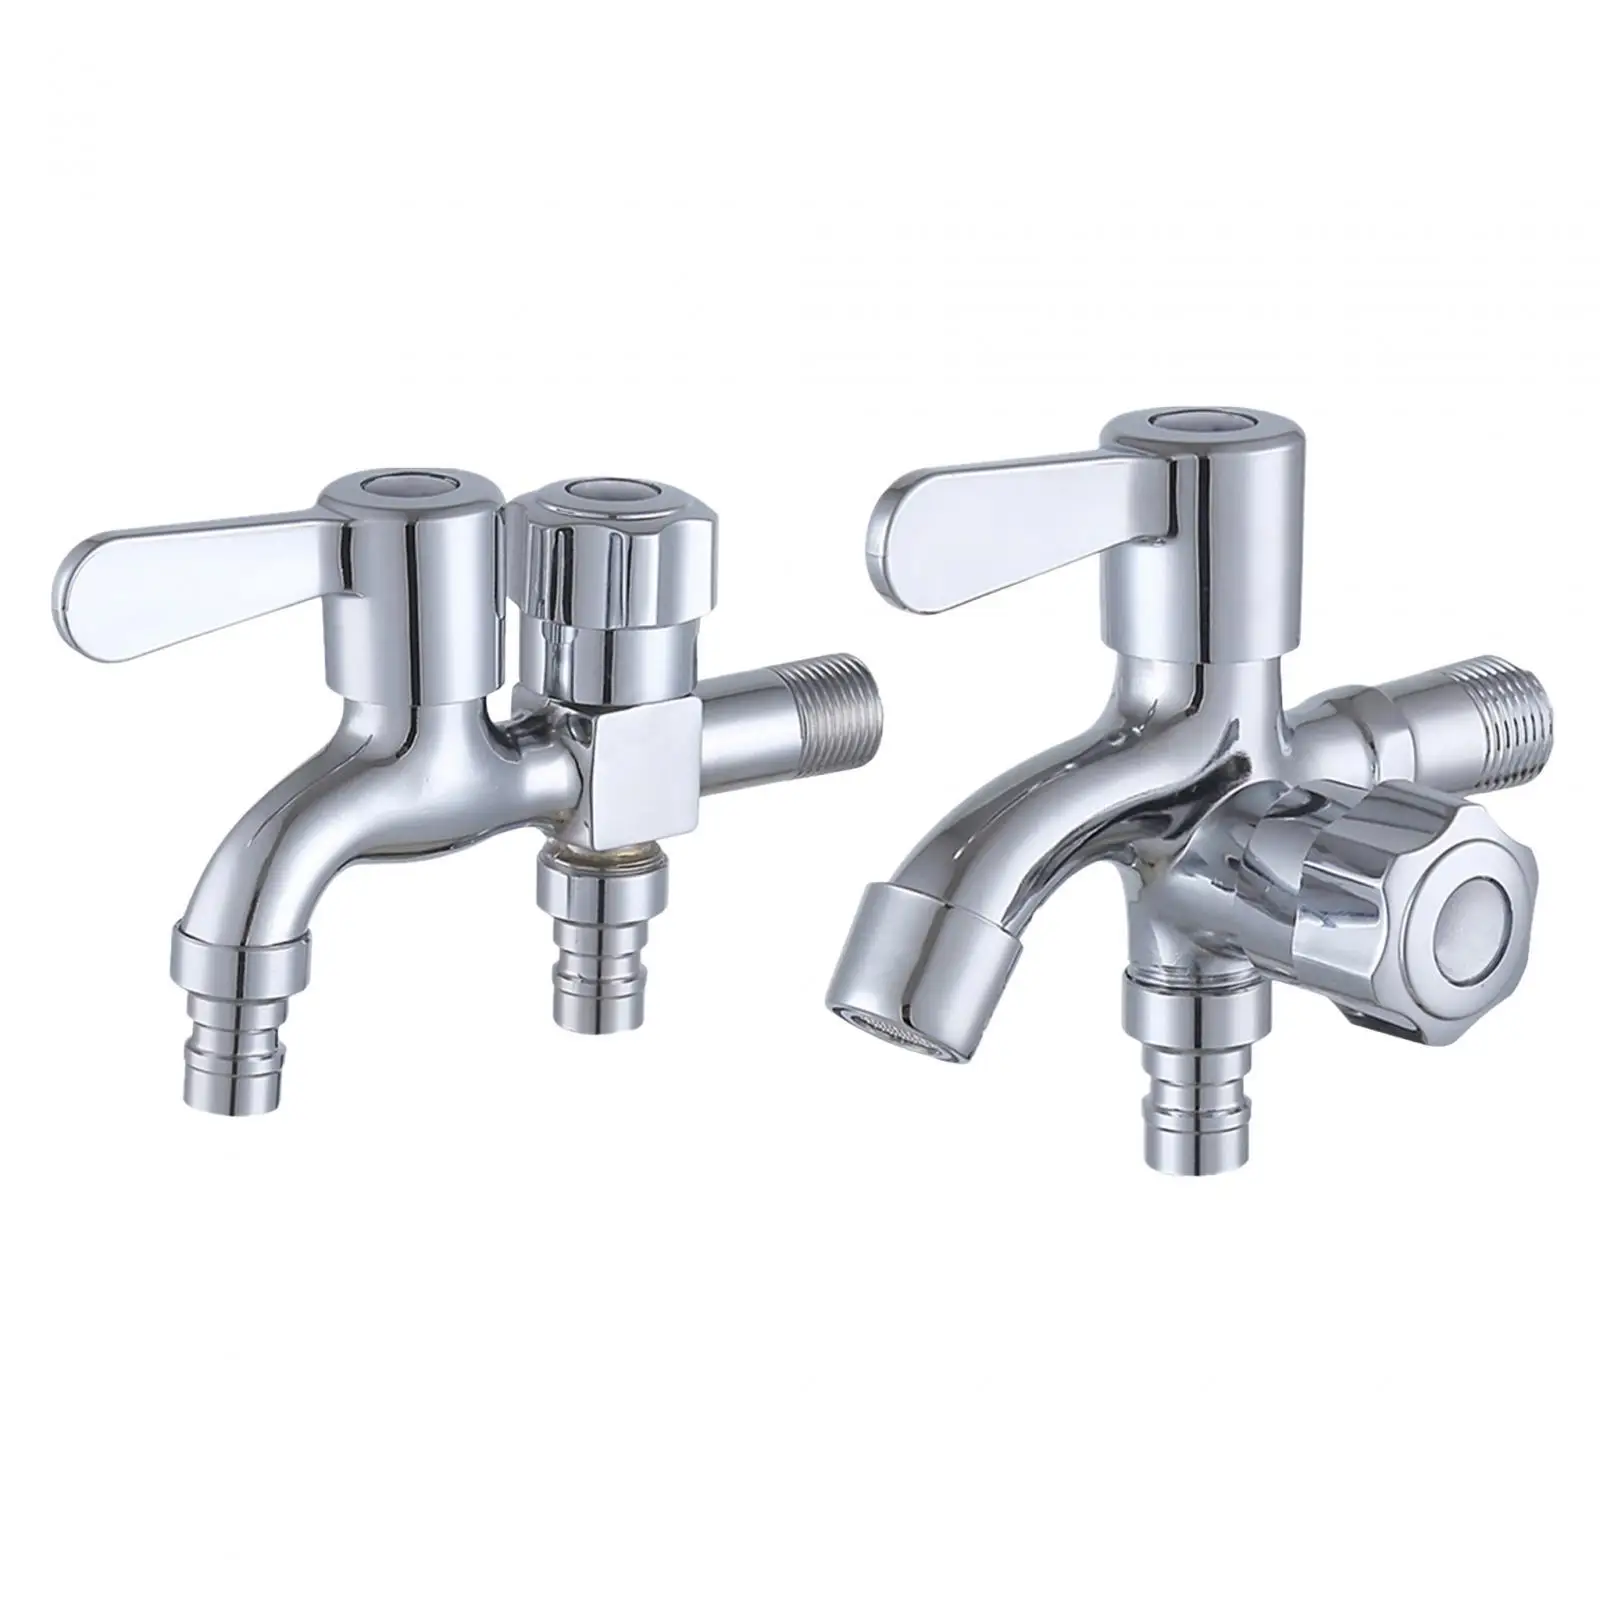 Water Faucet for Washing Machine Alloy Double Outlet Faucet Mop Pool Faucet for Outdoor Kitchen Sink Garden Balcony